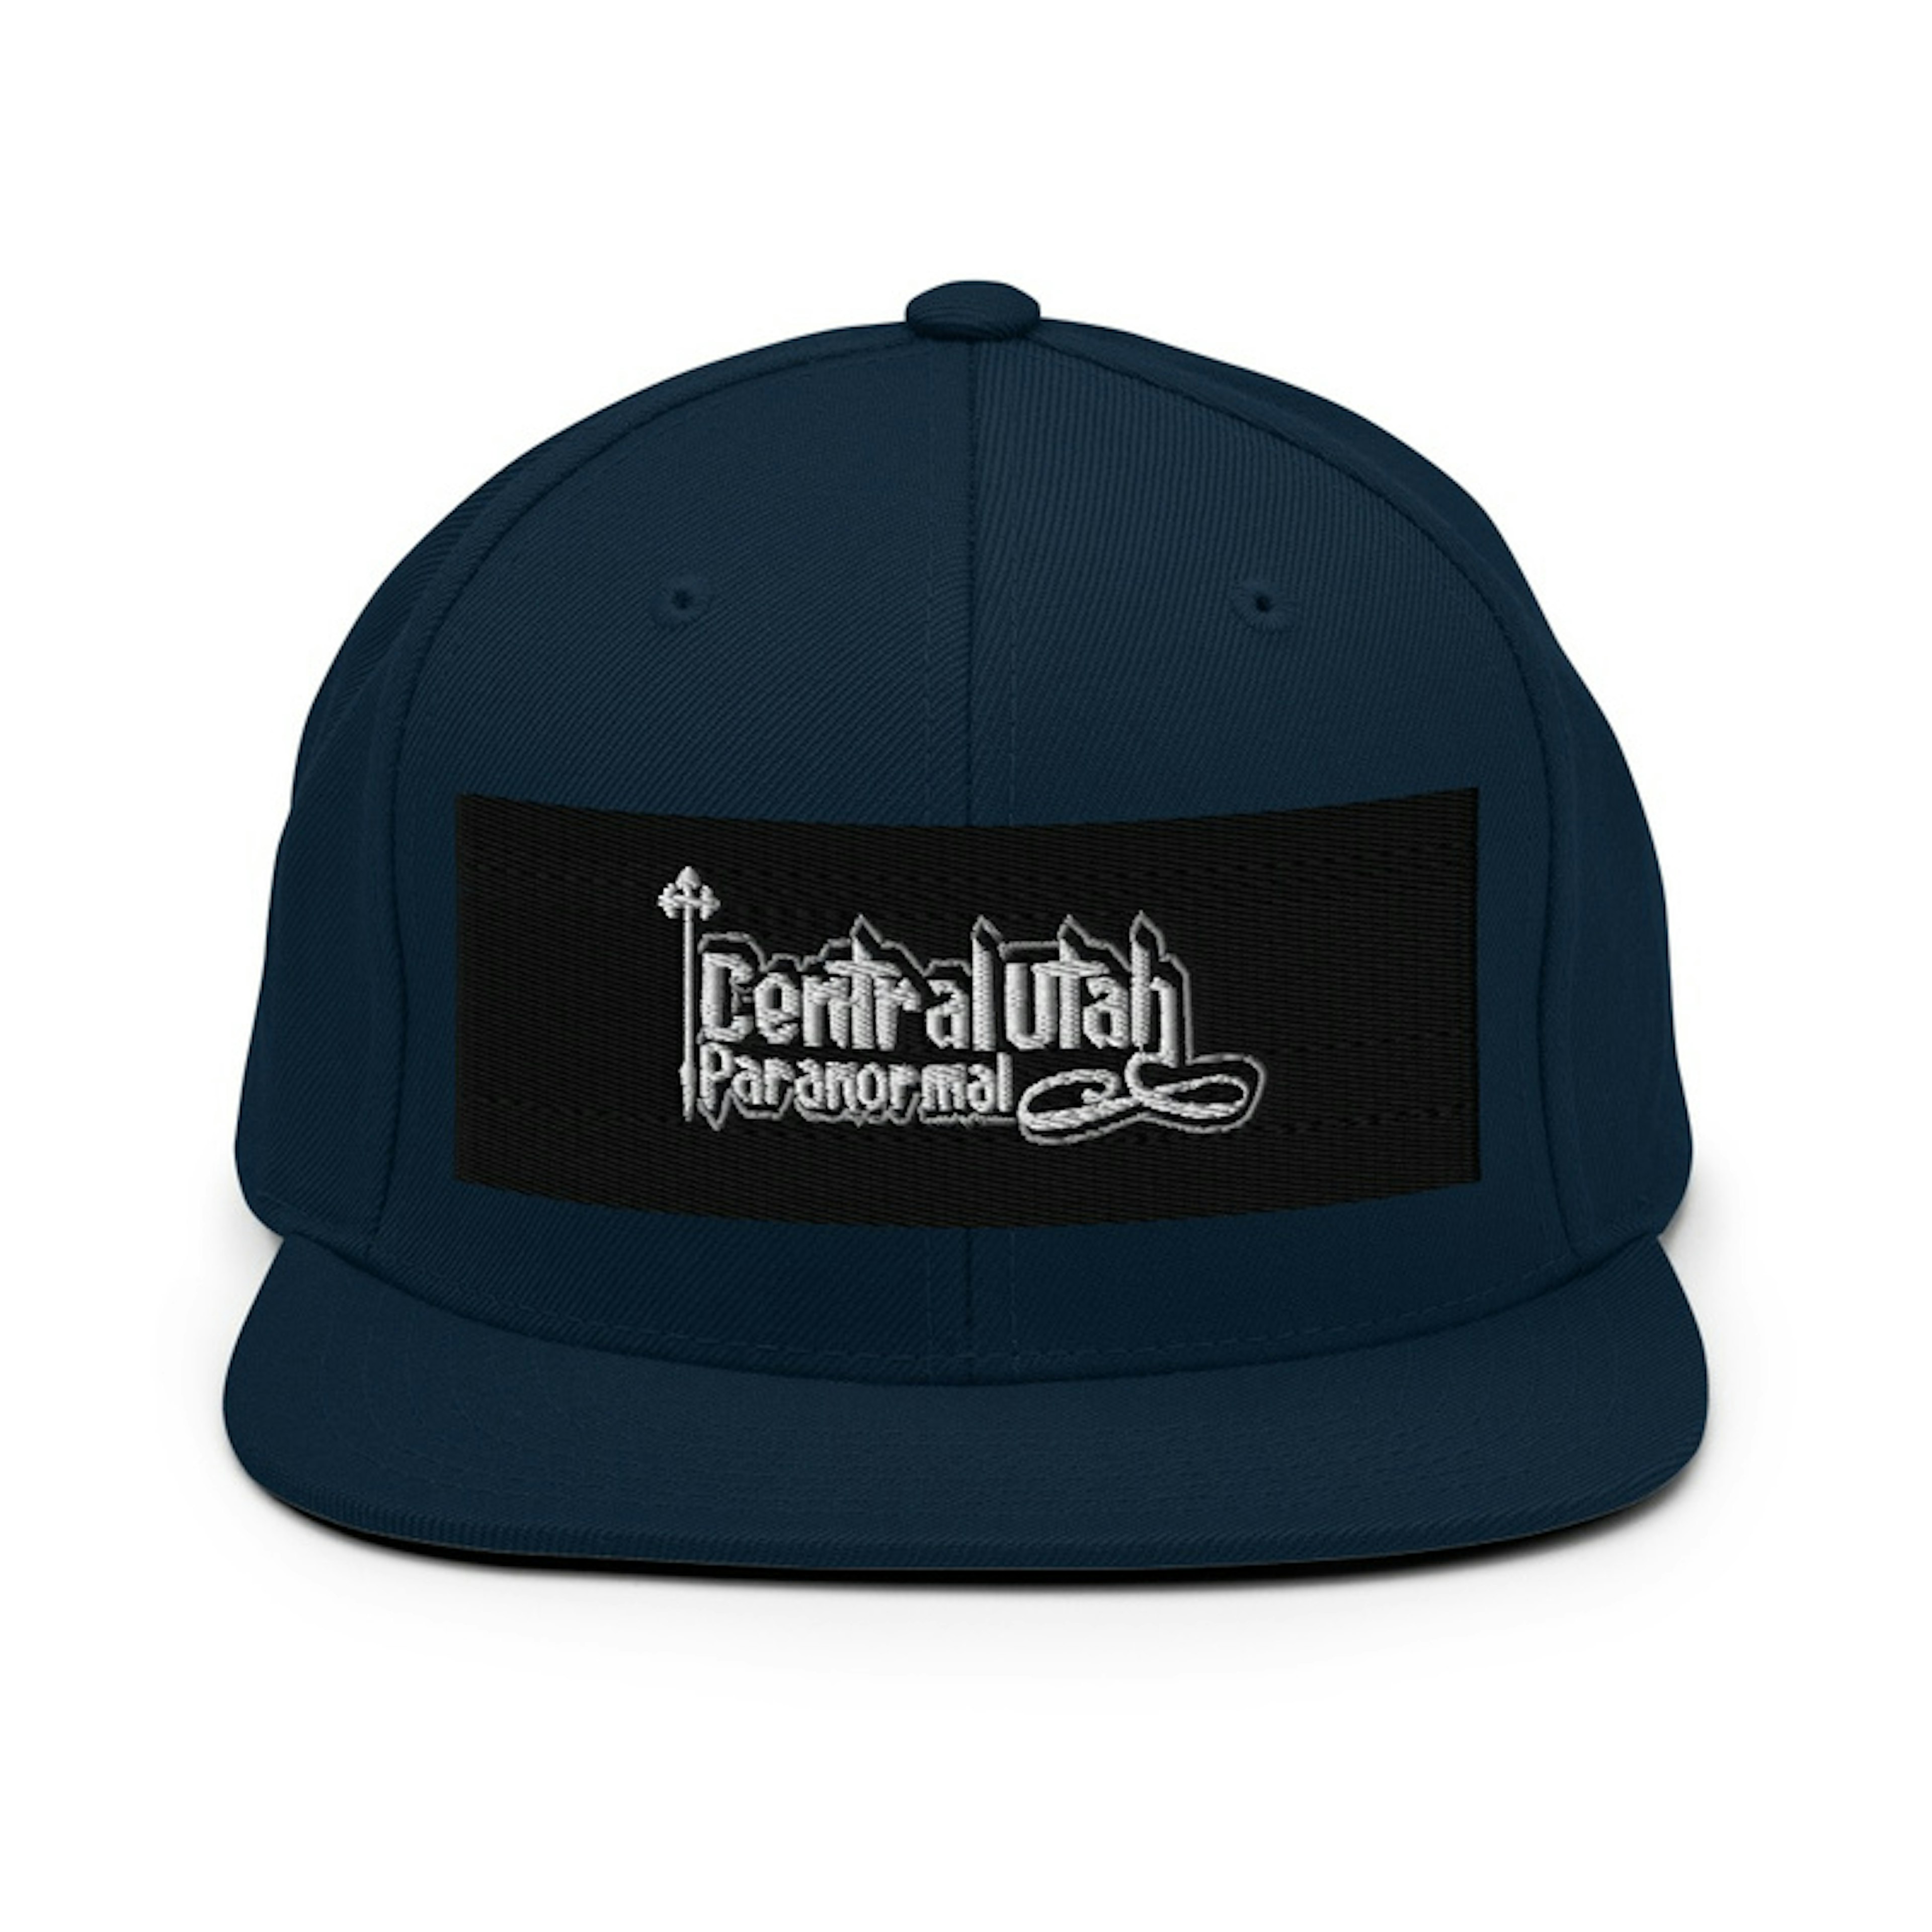 CUP LOGO HAT